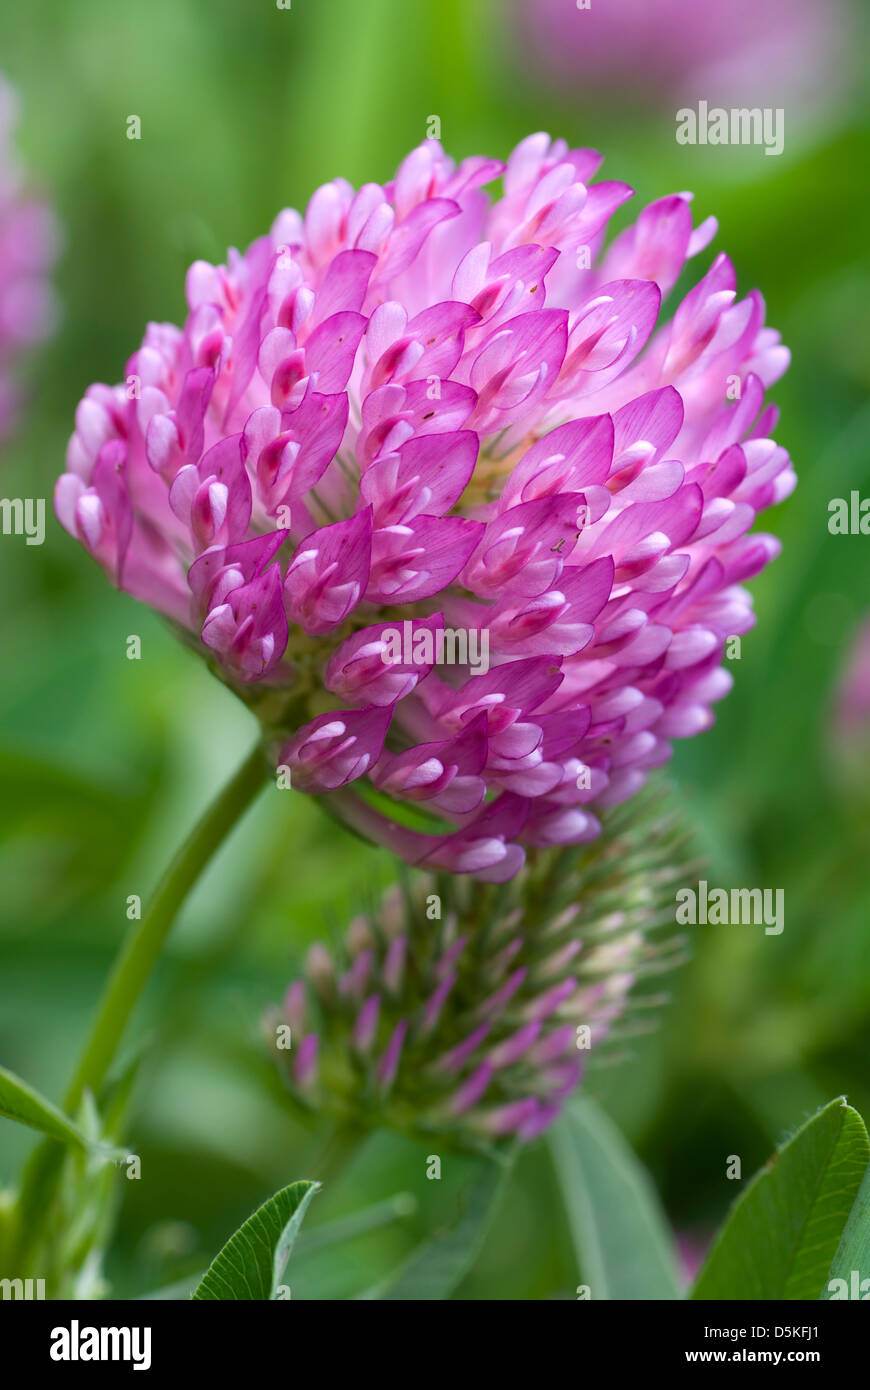 red flower clover on green background leaf Stock Photo